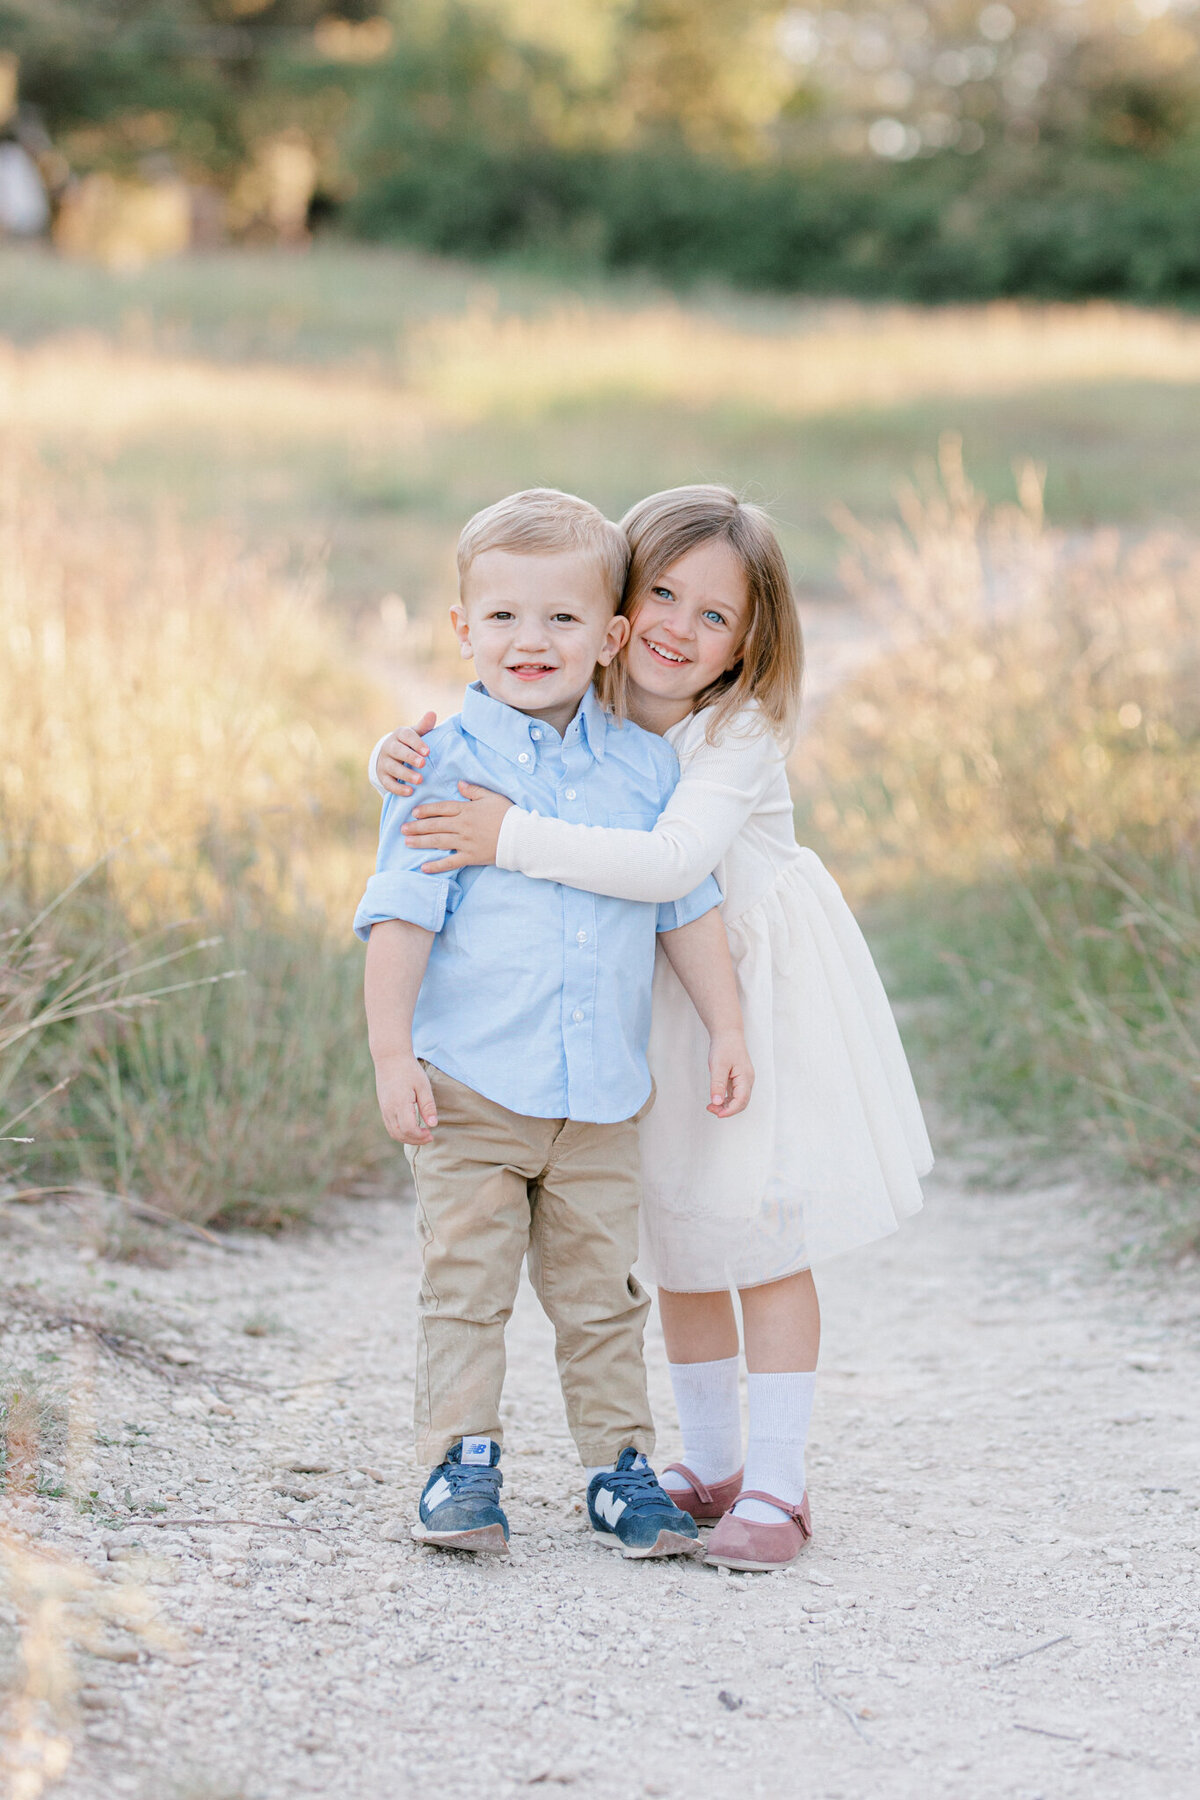 Fall Mini Sessions at Norbuck Park | Dallas Family Photographer | Sami Kathryn Photography | Oct 2022-15